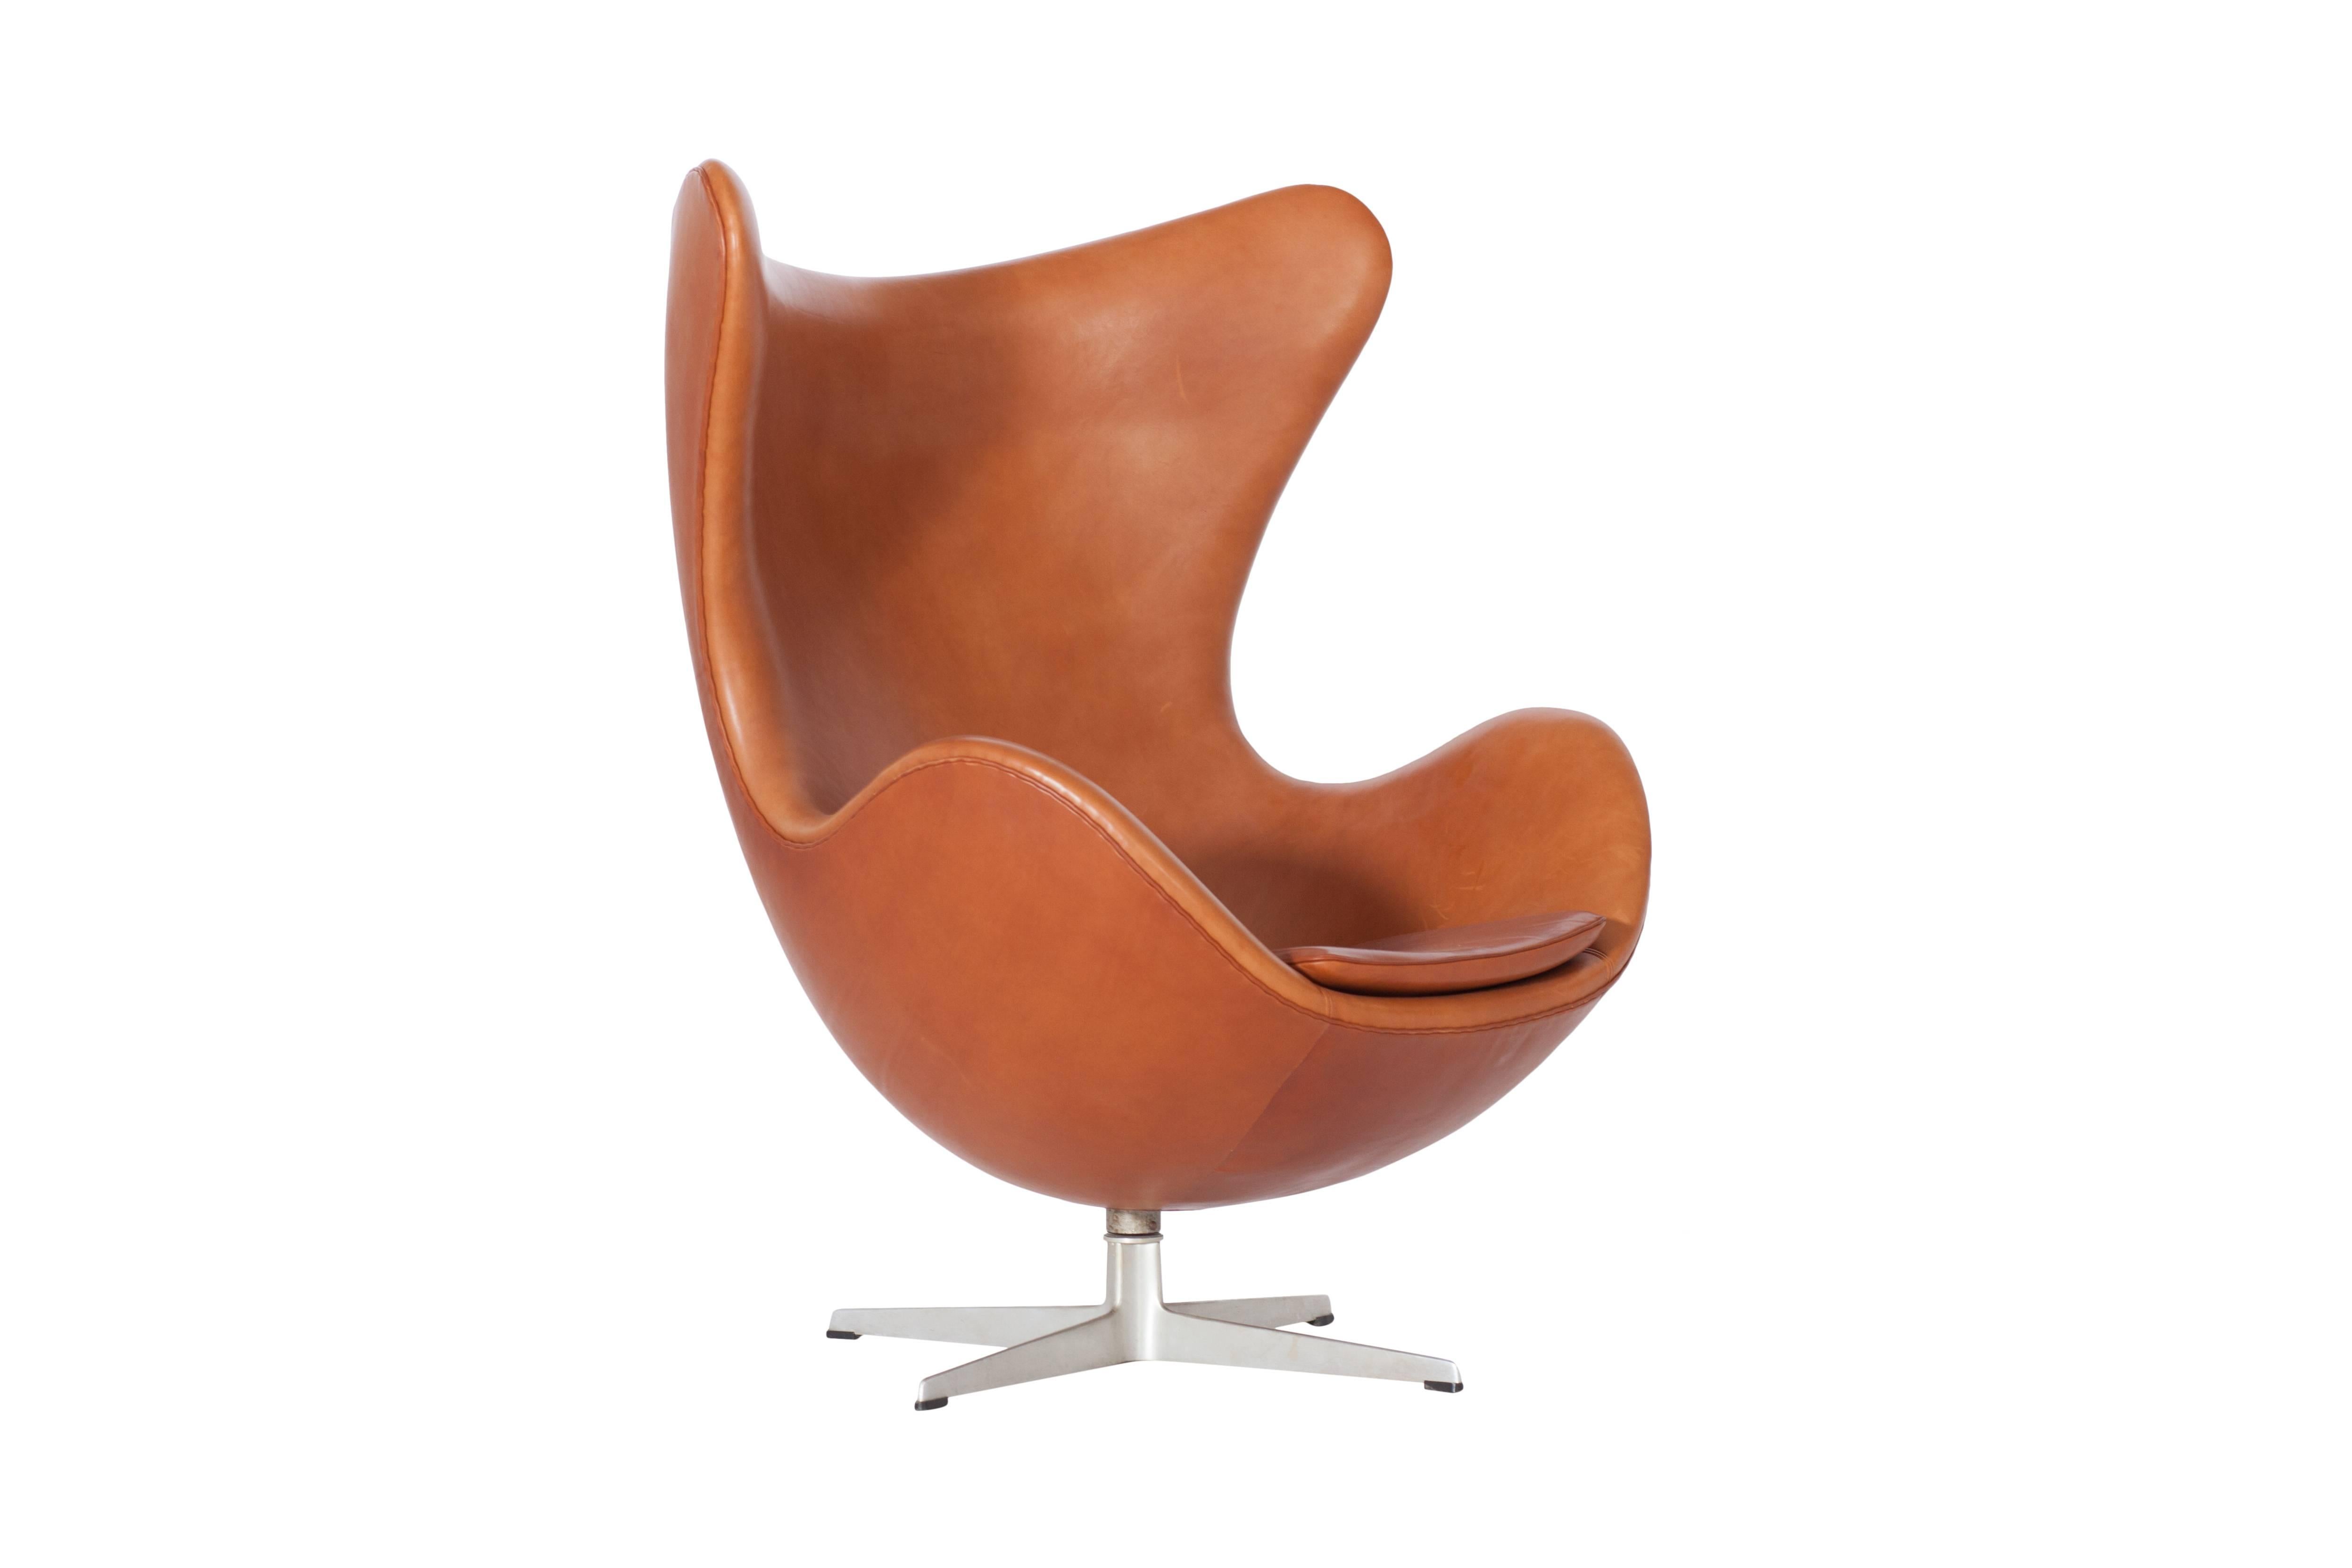 Egg chair by Arne Jacobsen, Fritz Hansen 

In tan/cognac leather with alu swivel base.

1960s edition in great vintage condition

Measures: H 107 cm, SH 39 cm, W 87 cm, D 87 cm.

